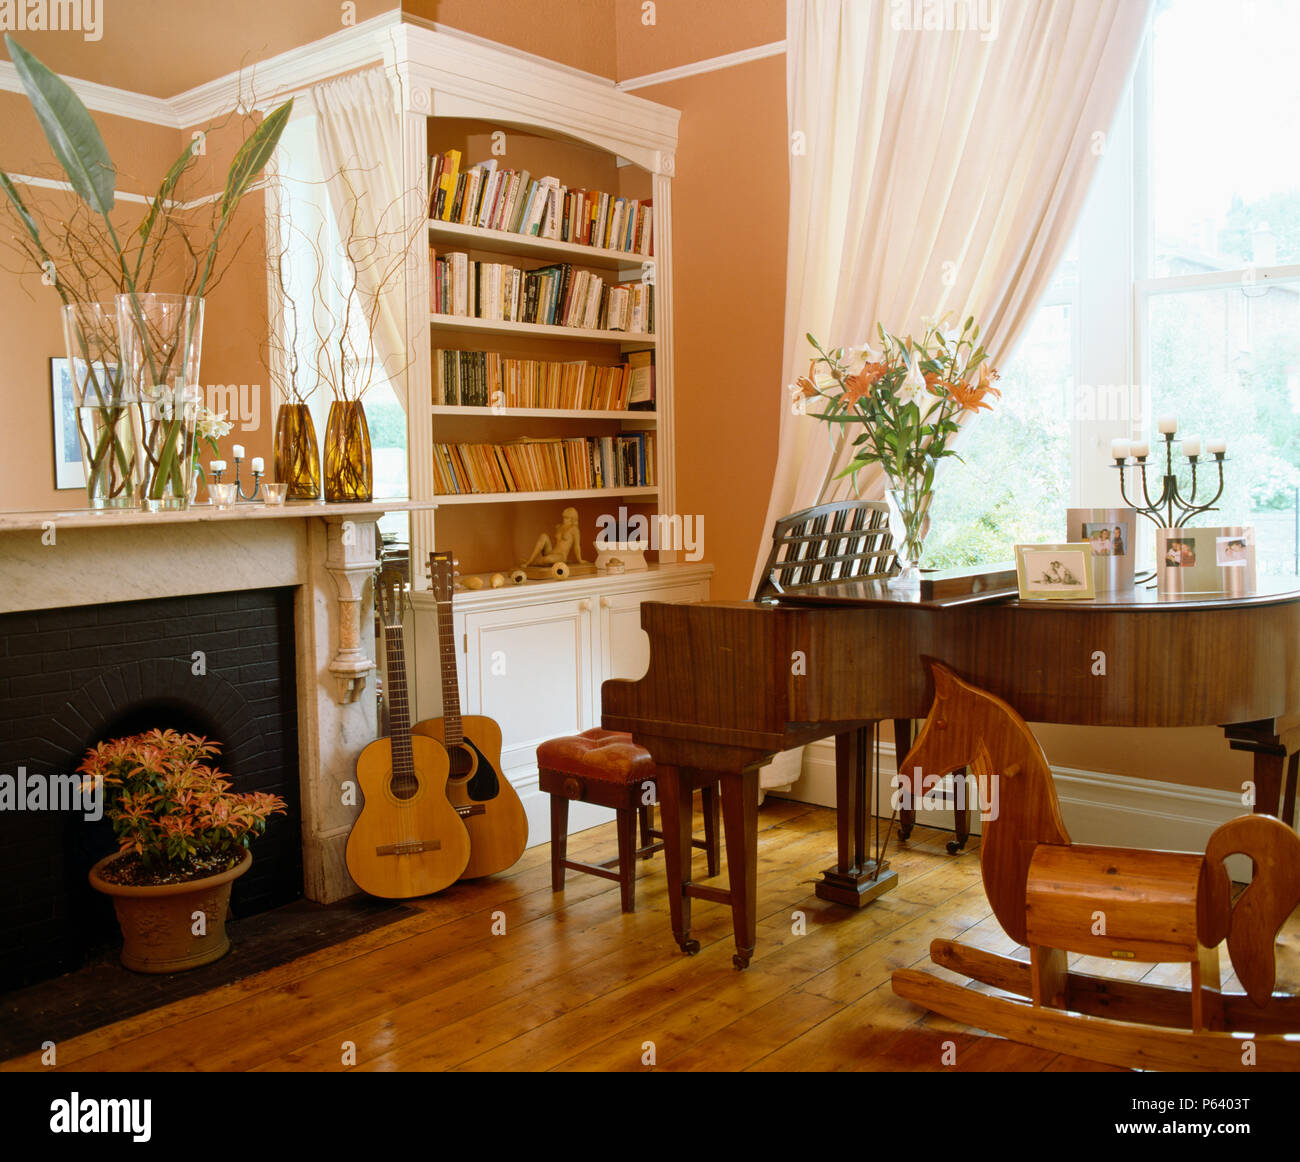 Grand Piano And Guitars In Living Room With Highly Polished Wooden